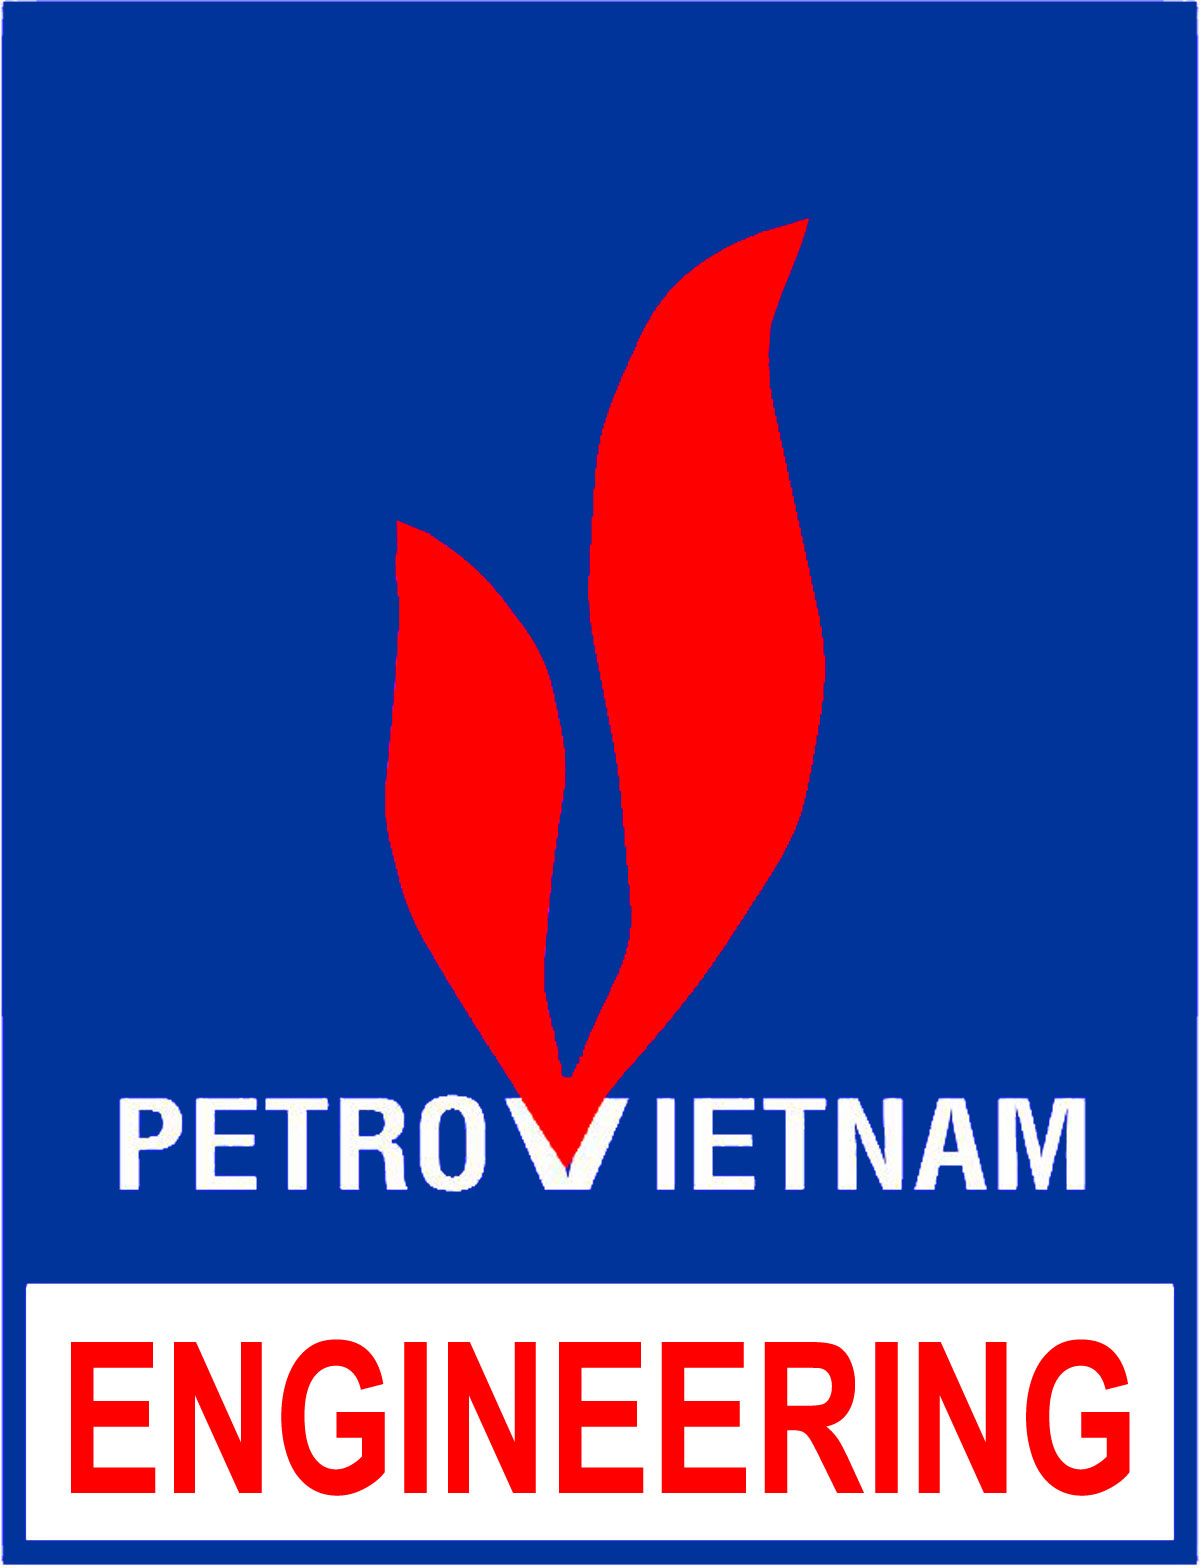 Pve   Petrovietnam Engineering Consultancy Jsc   Pv Engineering   Vietstockfinance - Petrovietnam Vector, Transparent background PNG HD thumbnail